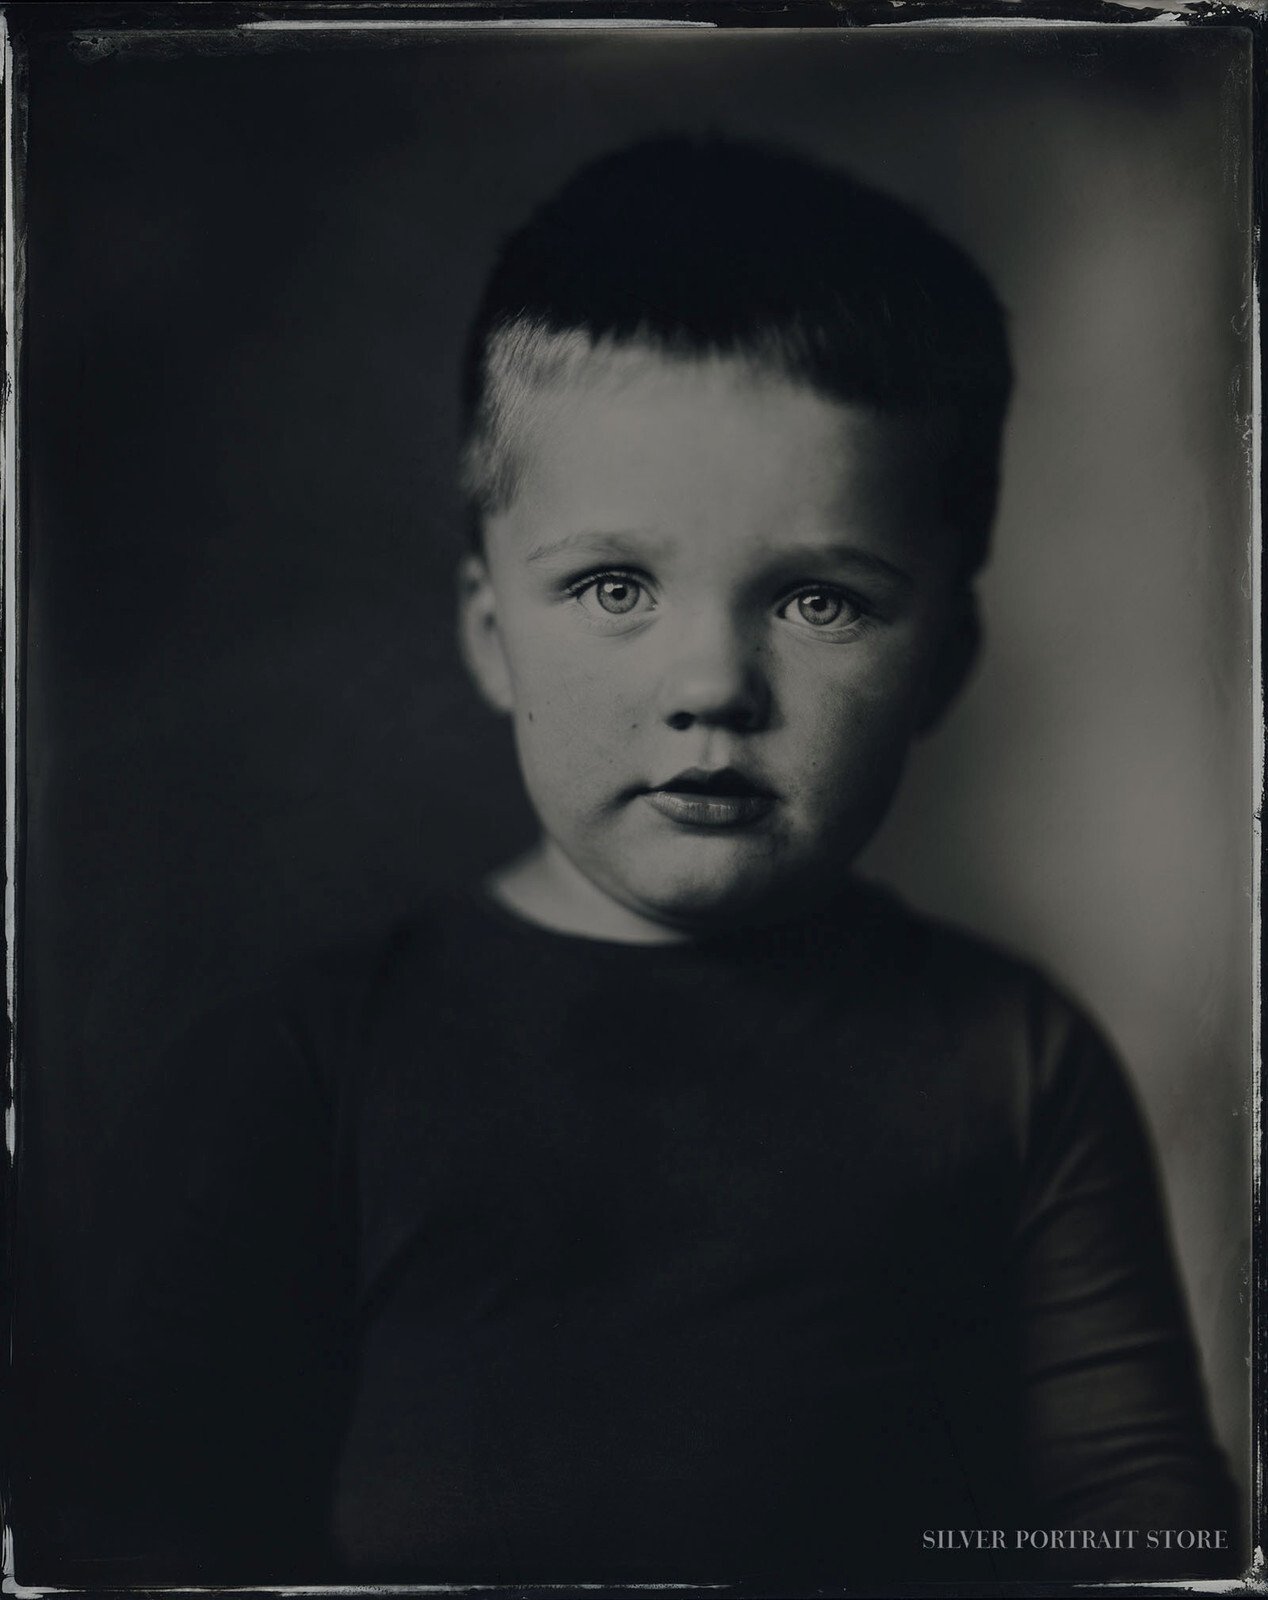 Ysbrand-Silver Portrait Store-scan from Wet plate collodion-Tintype 20 x 25 cm.